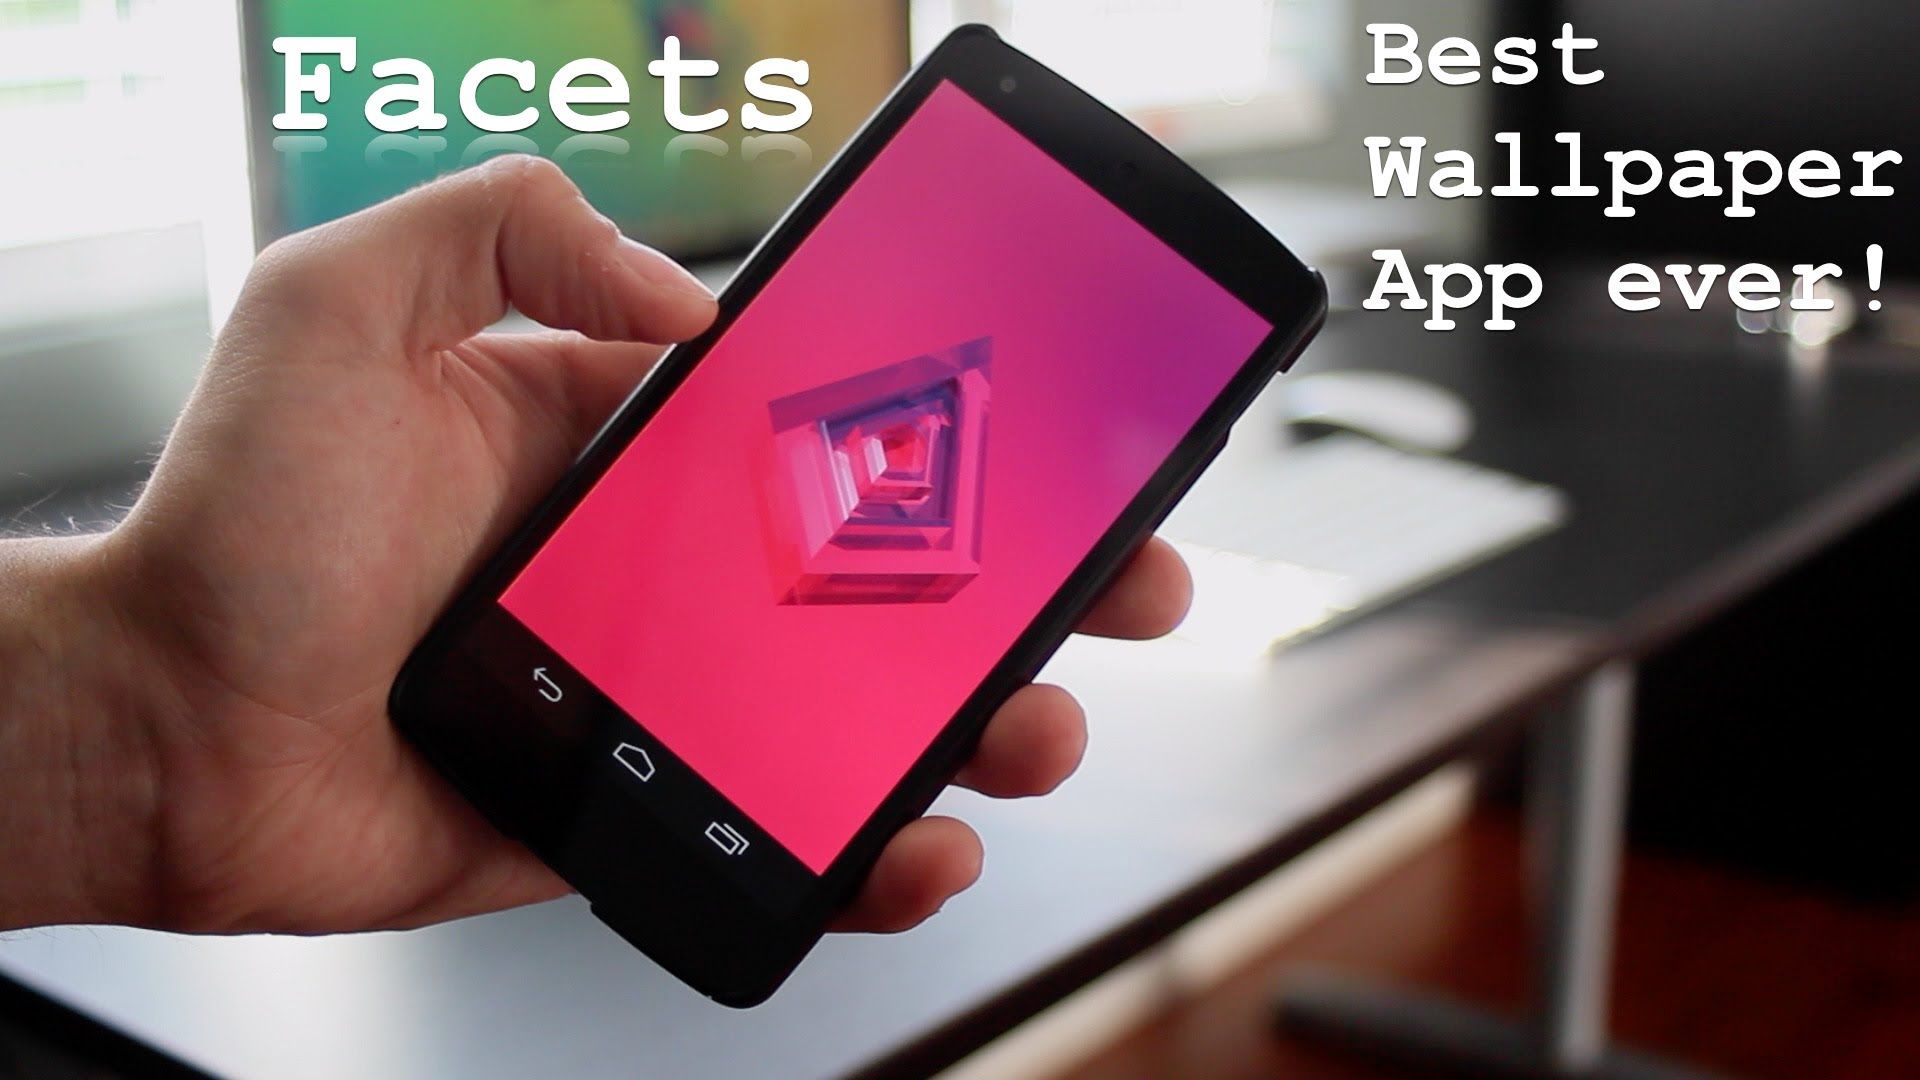 Facets - Best Wallpaper App on Android [Google Play App] - YouTube